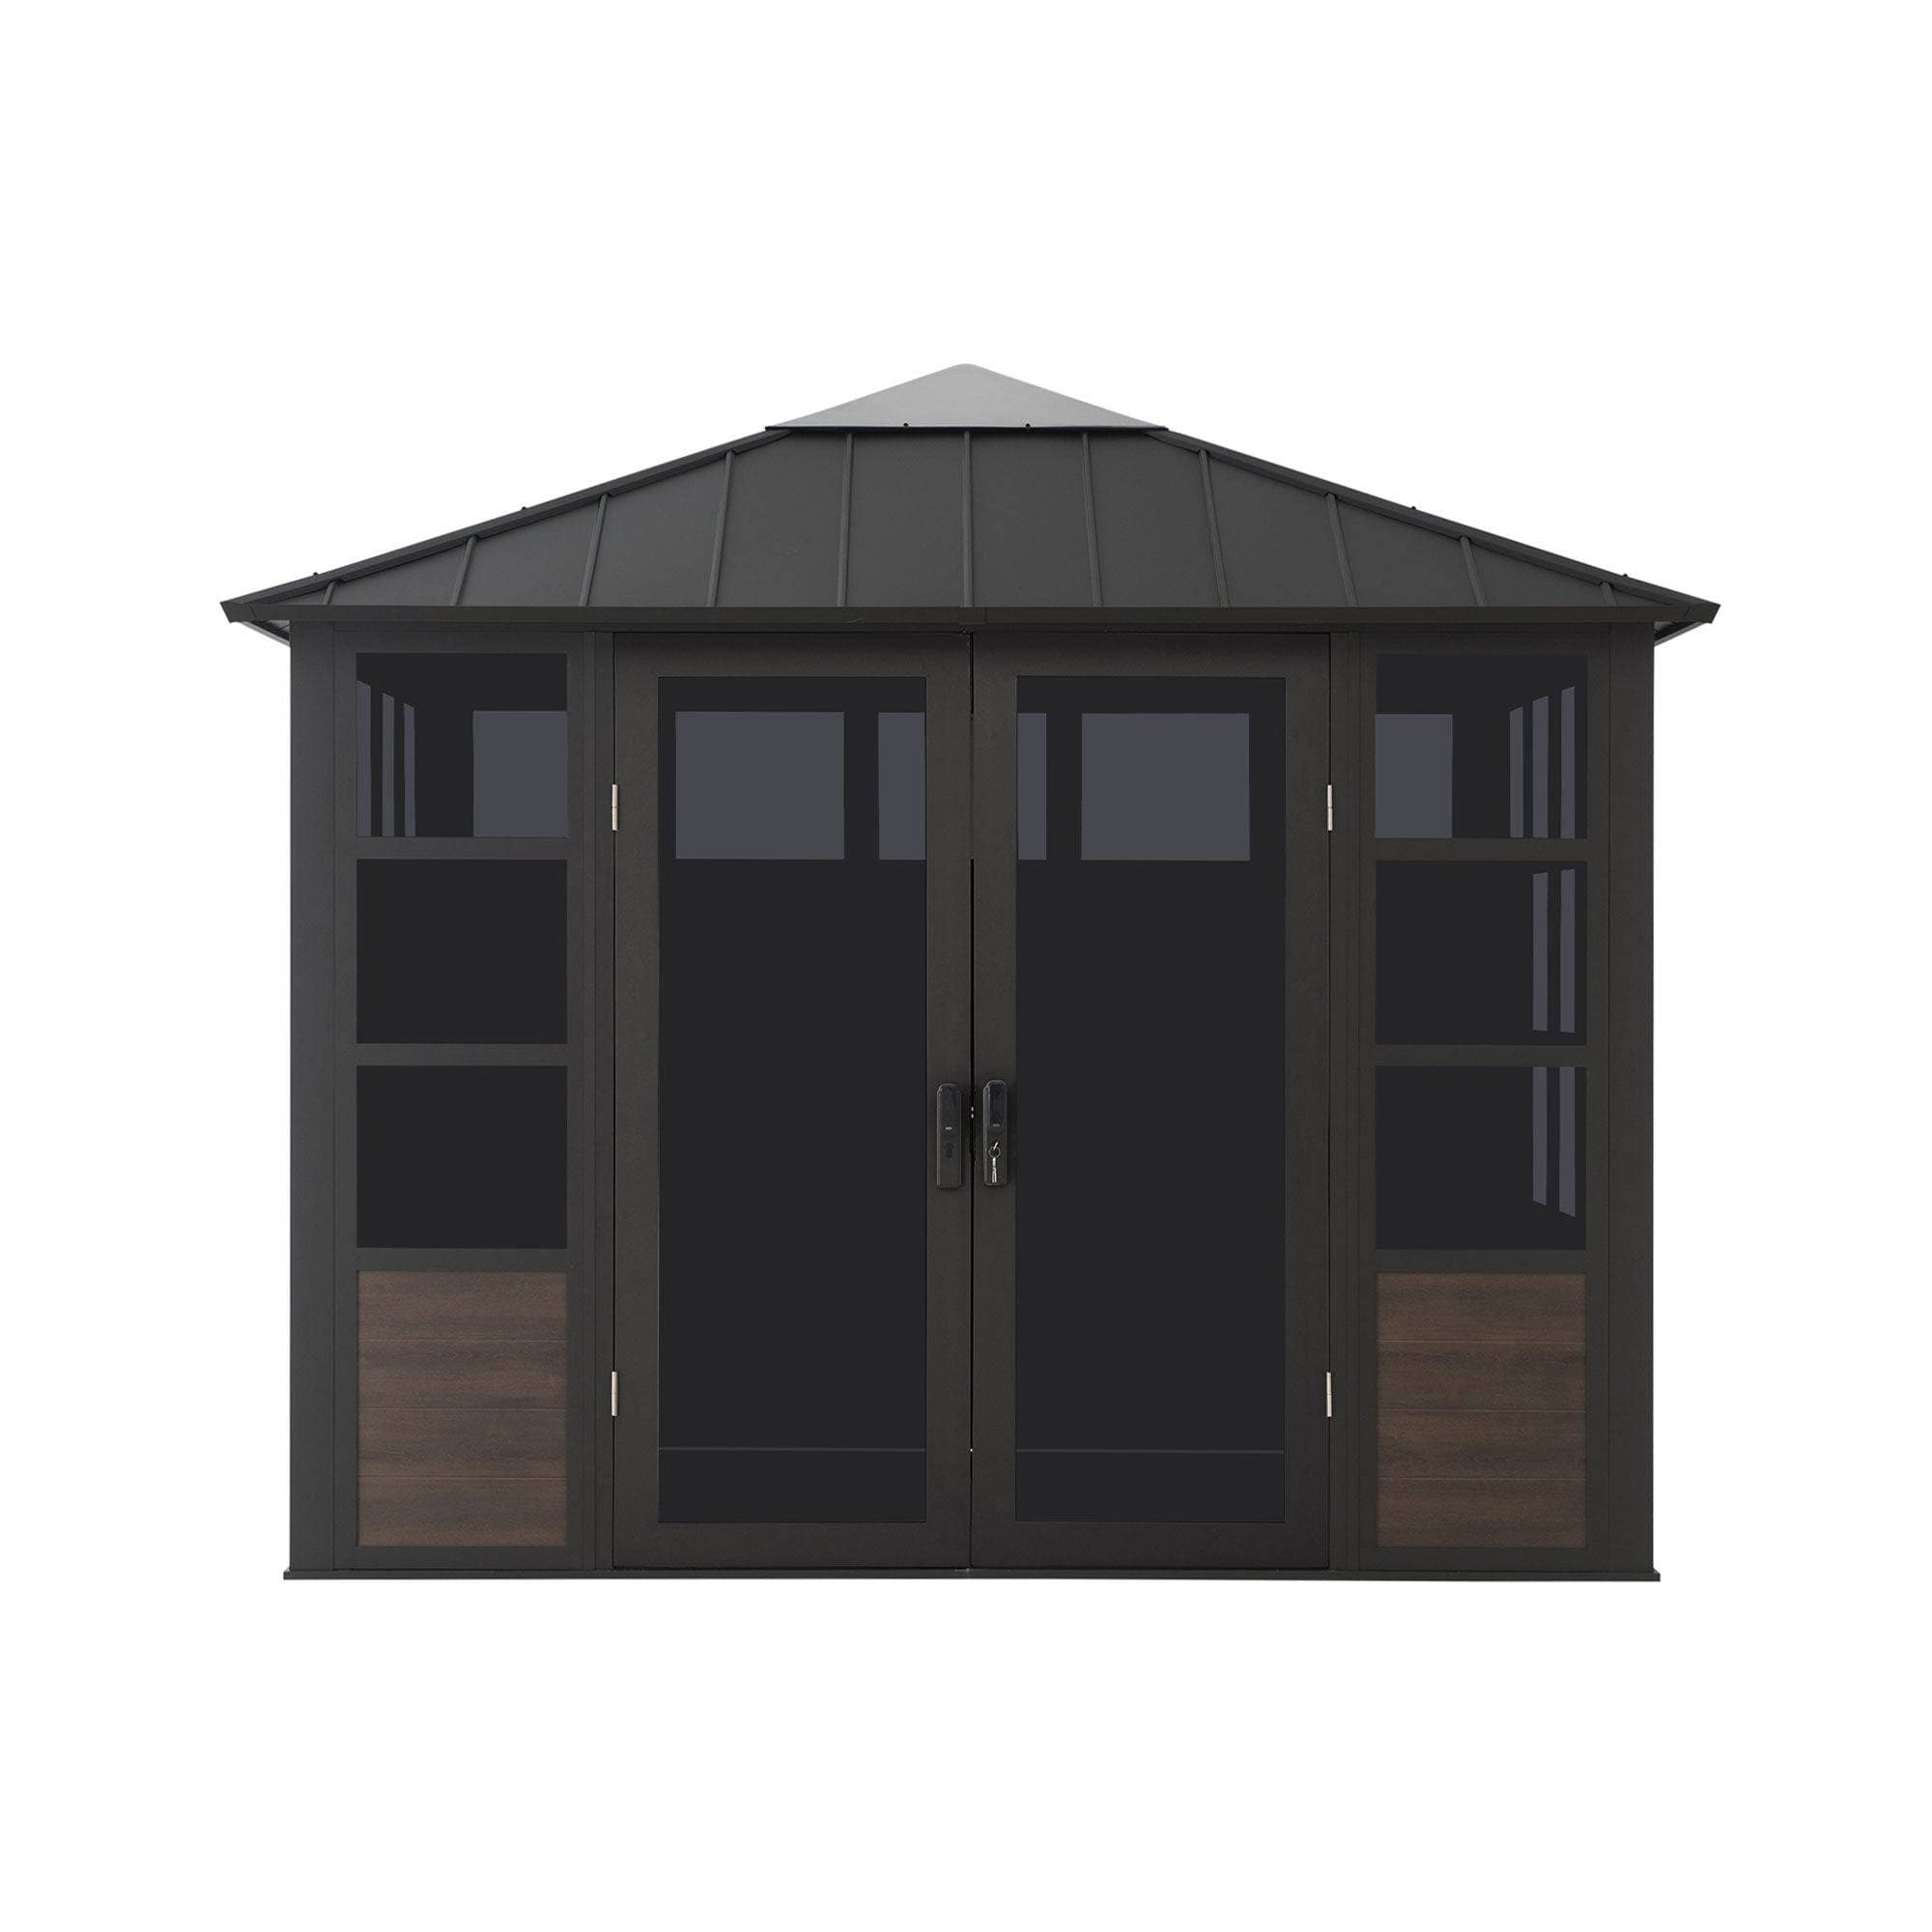 SummerCove 11 ft. x 11 ft. Black Steel Studio/Hot Tub Shelter with Mute Lock